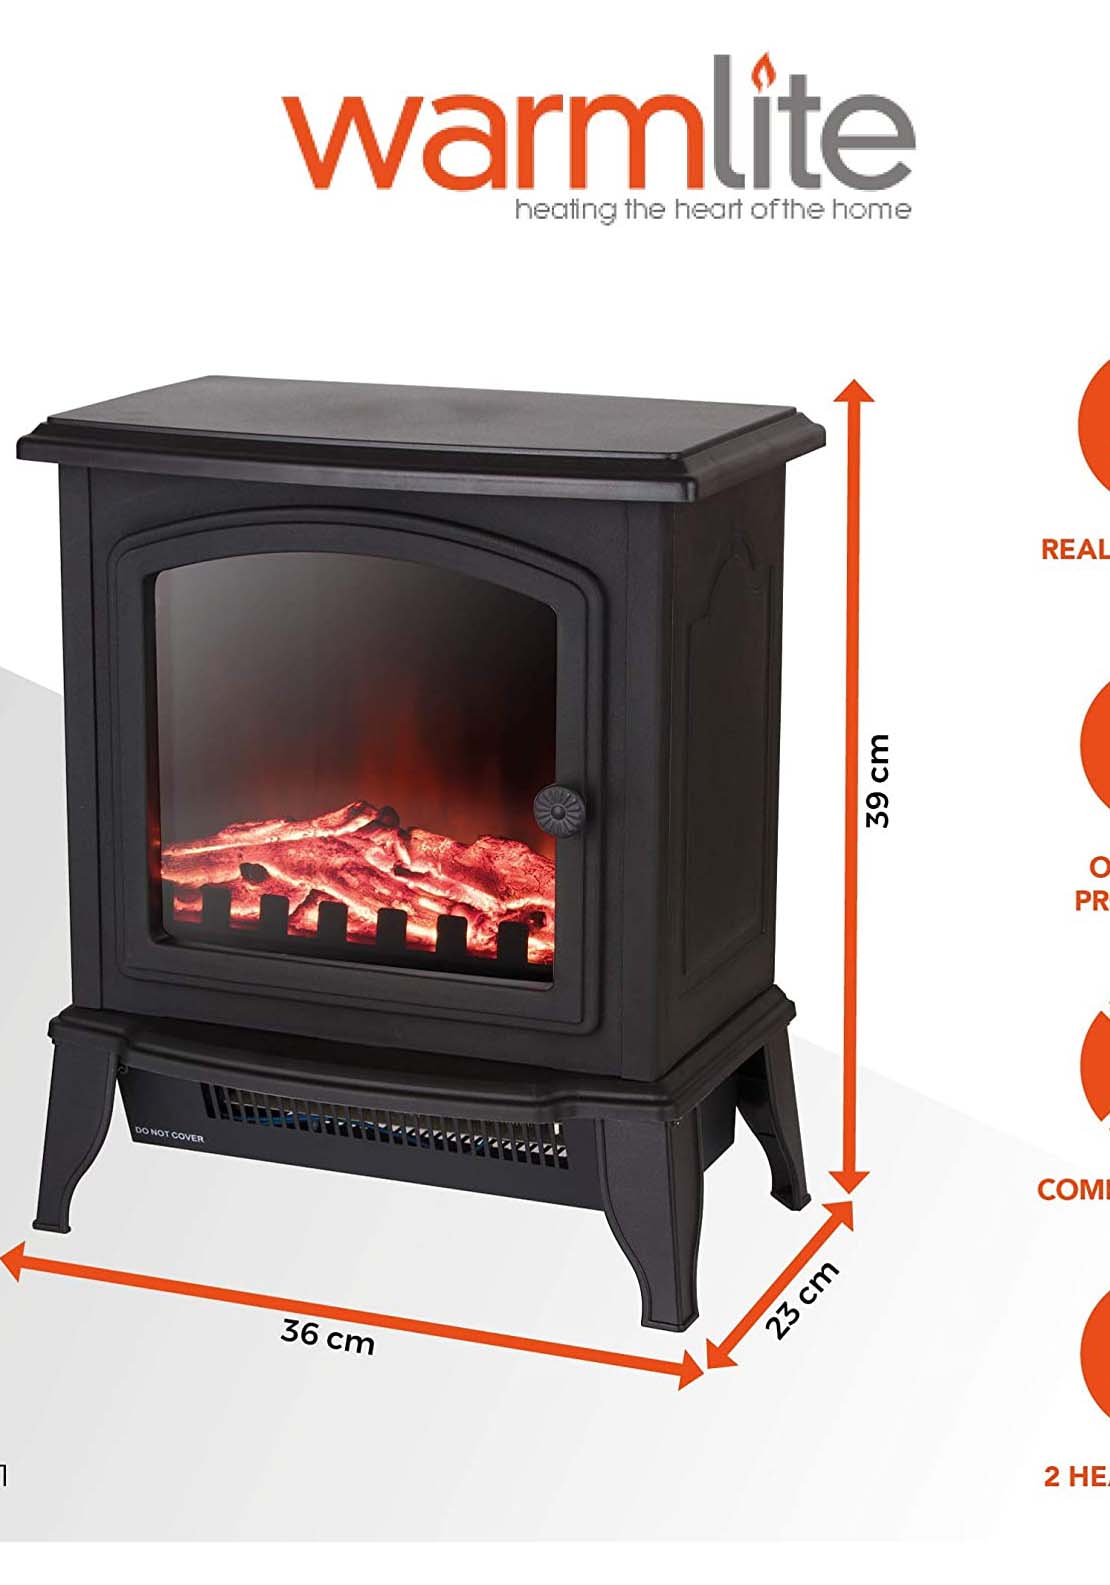 Warmlite Mable Compact Stove Fire | WL46021 - Black 1 Shaws Department Stores